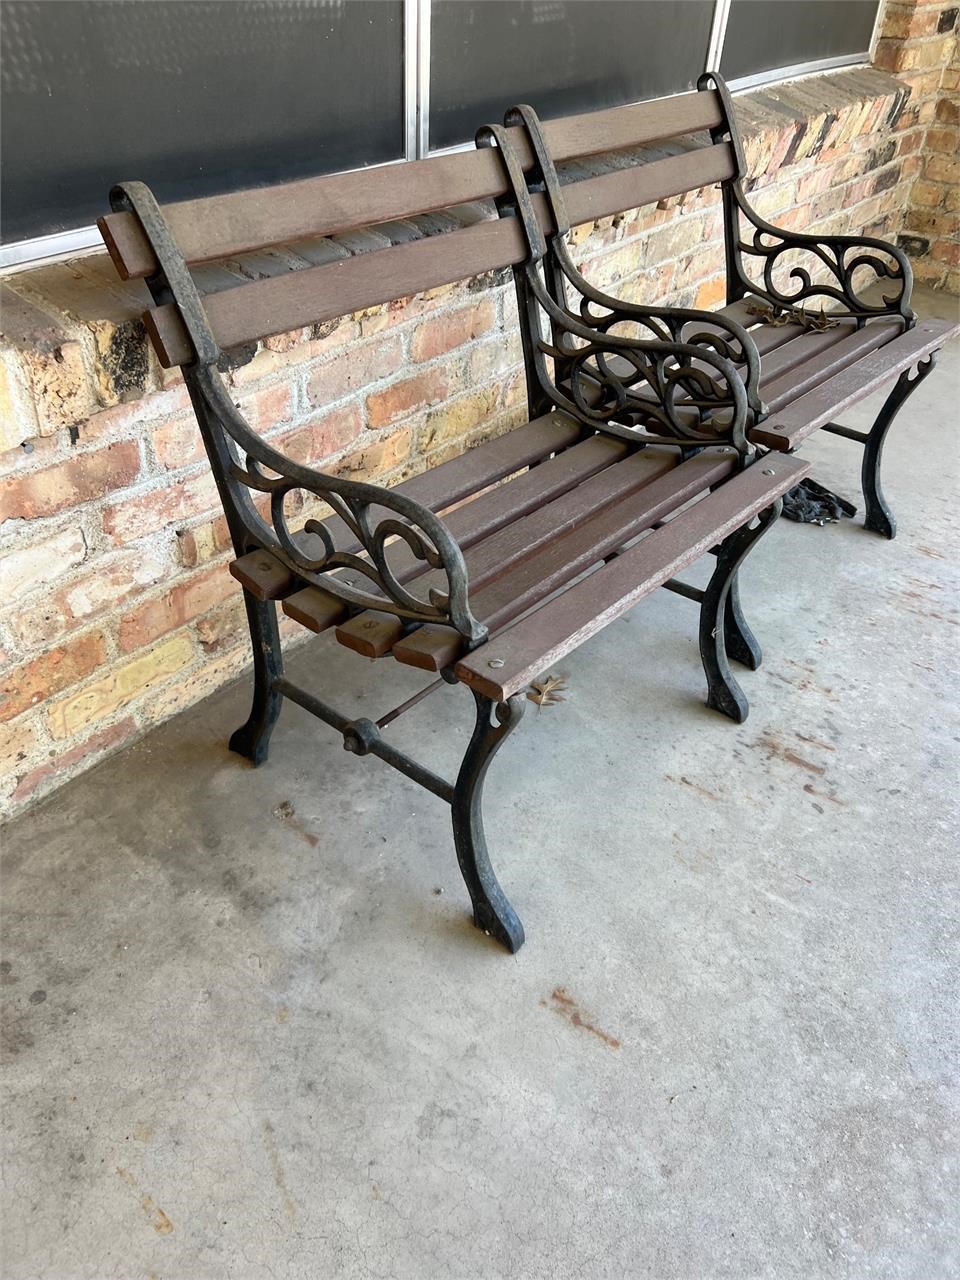 2 PORCH CHAIRS WOOD AND METAL